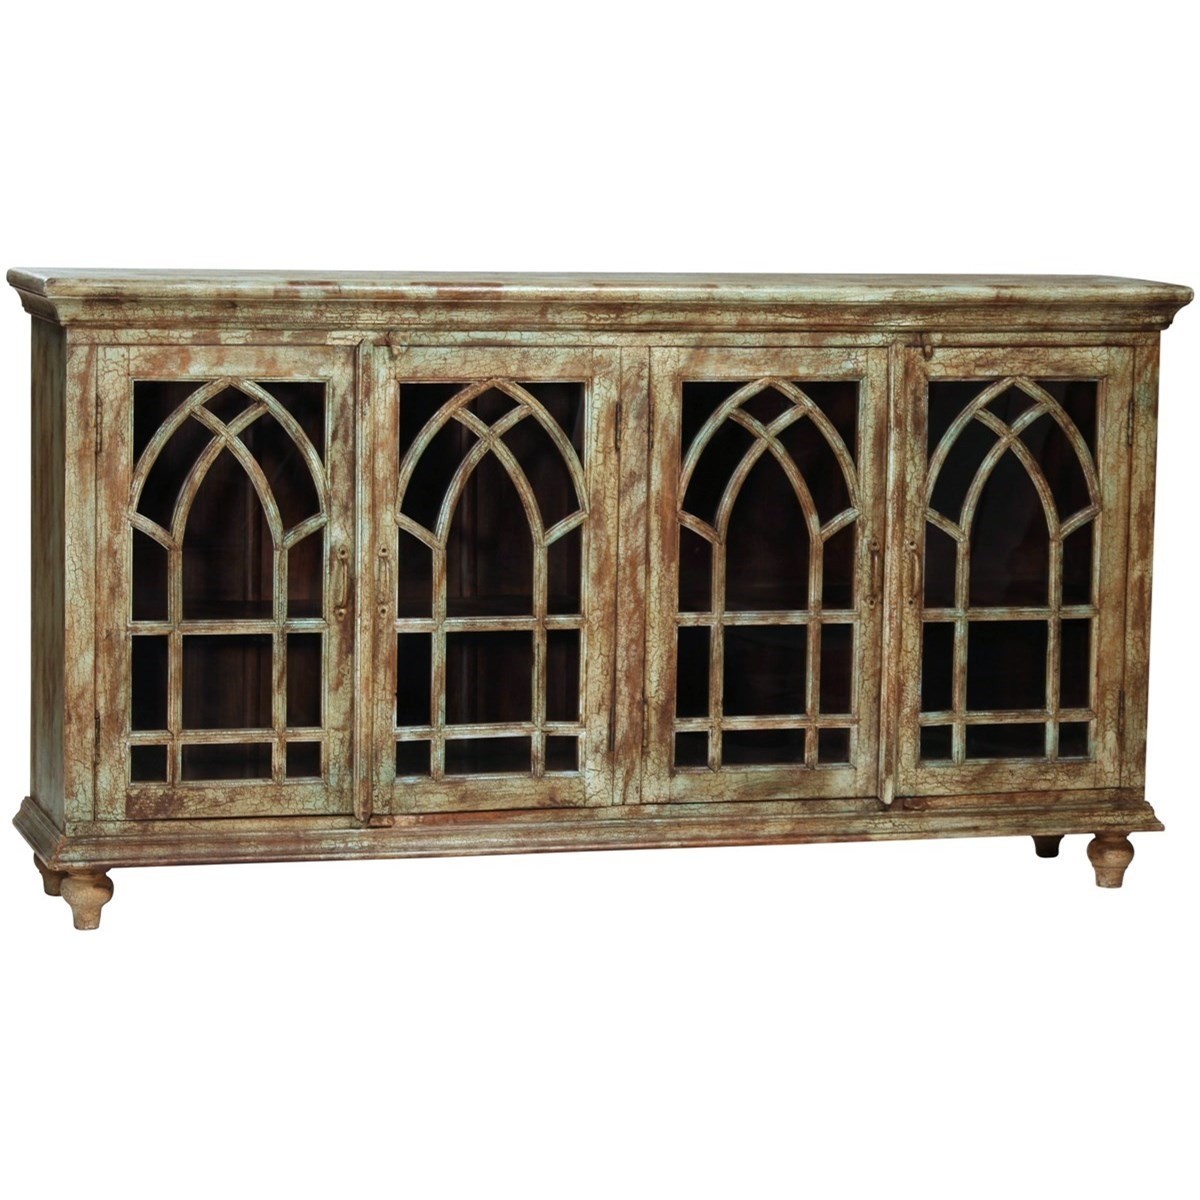 Reclaimed rustic cathedral arch with glass door sideboard cabinet buffet